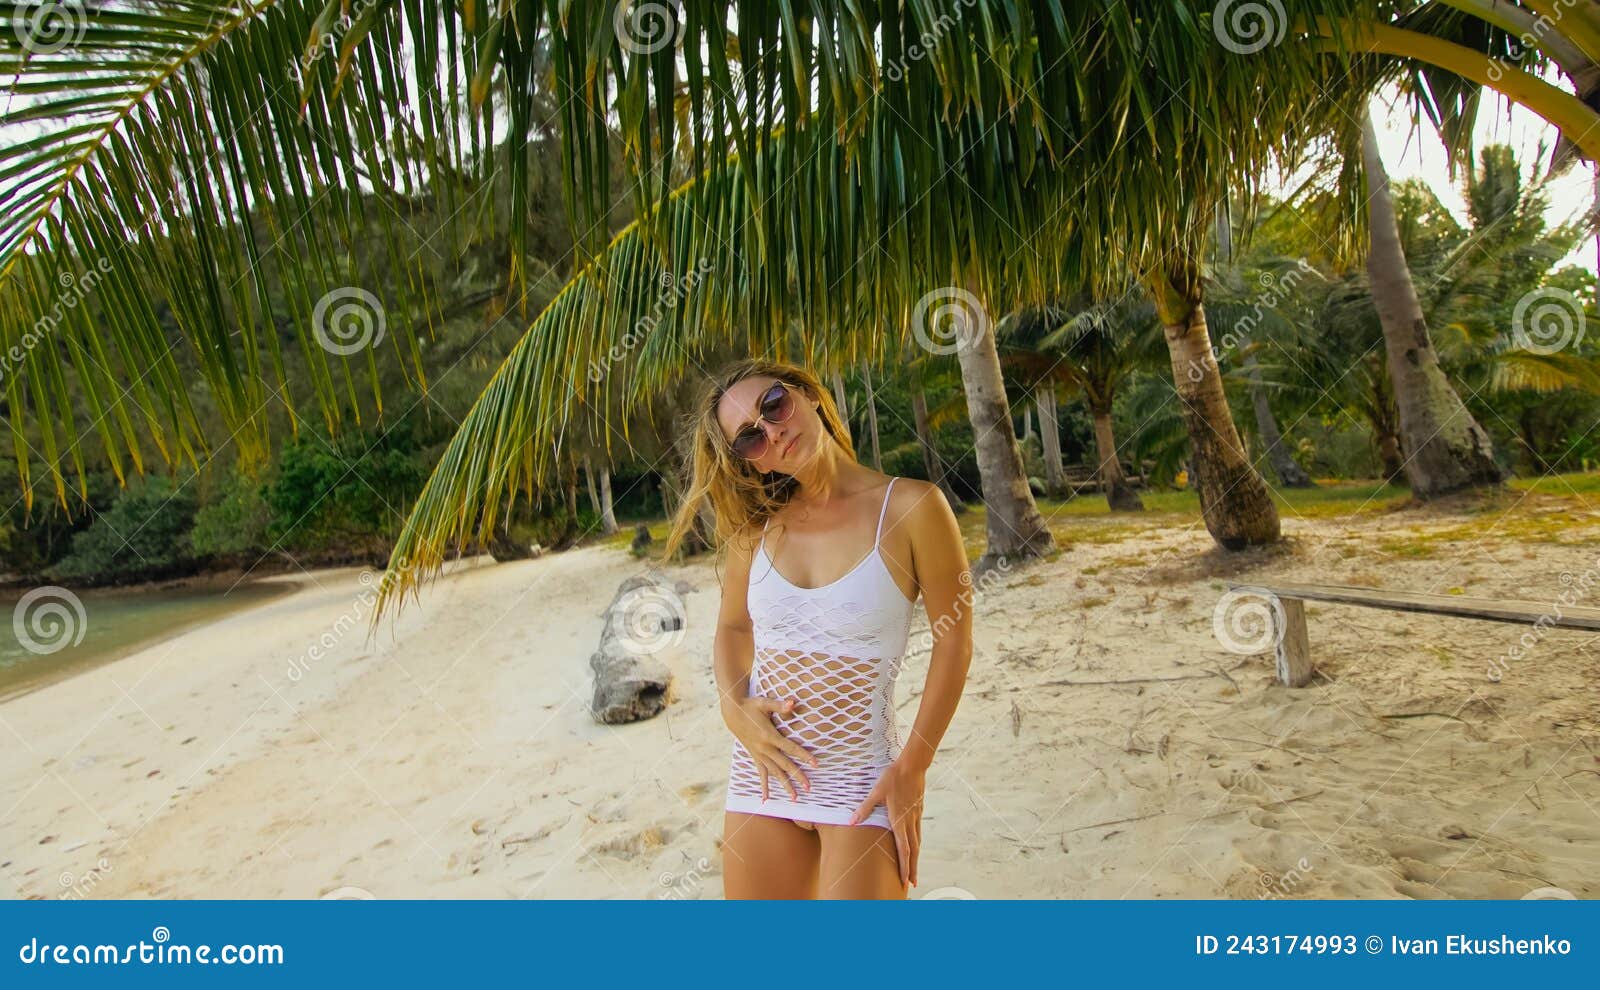 Ladies with appetizing breasts have a good time on the beach